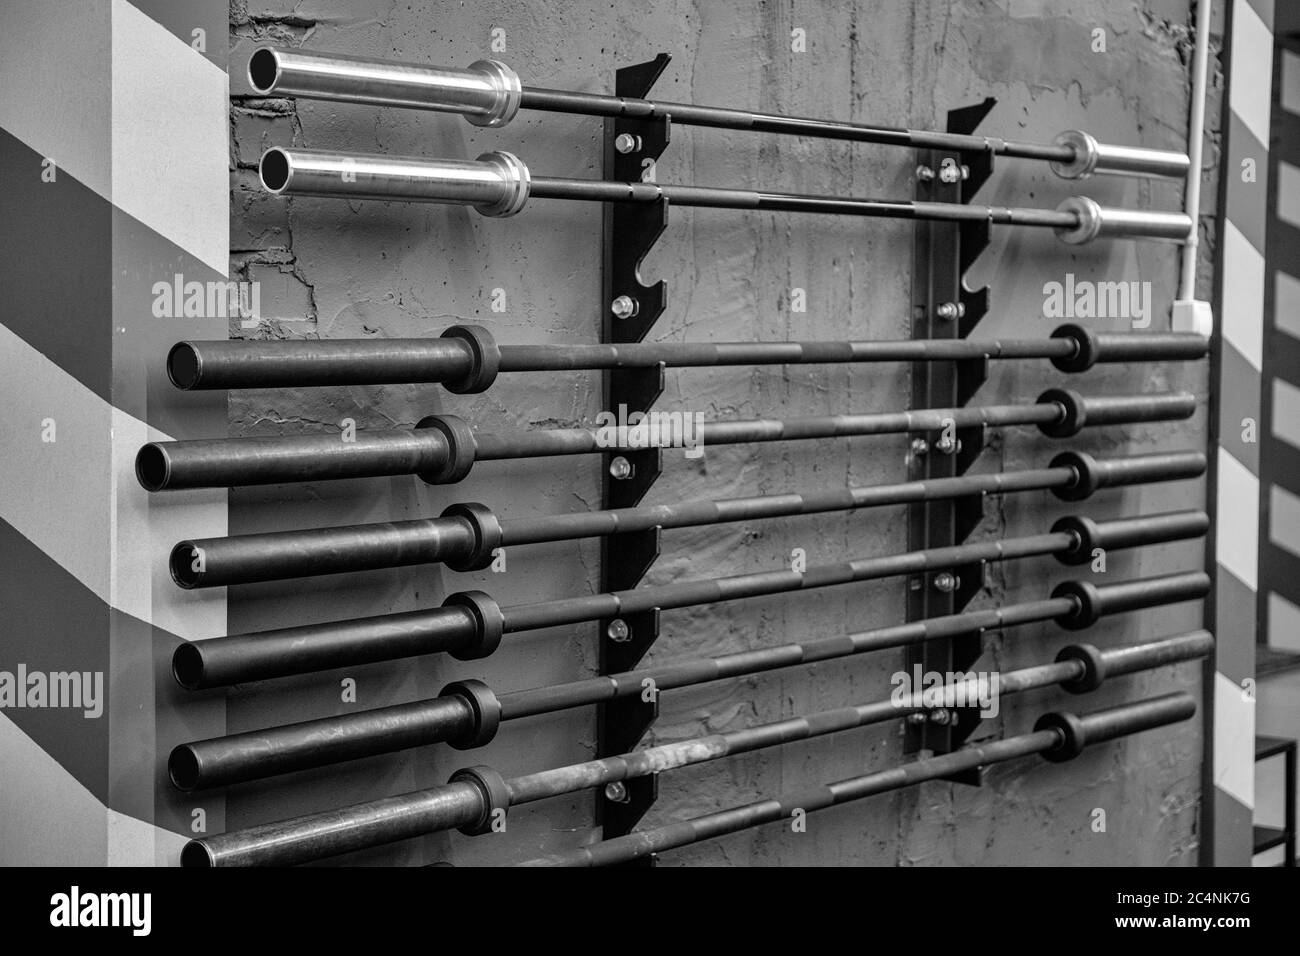 Fitness equipment for workout in Gym. Barbell without weights on row. Disassembled barbells on wall in fitness center. Stock Photo